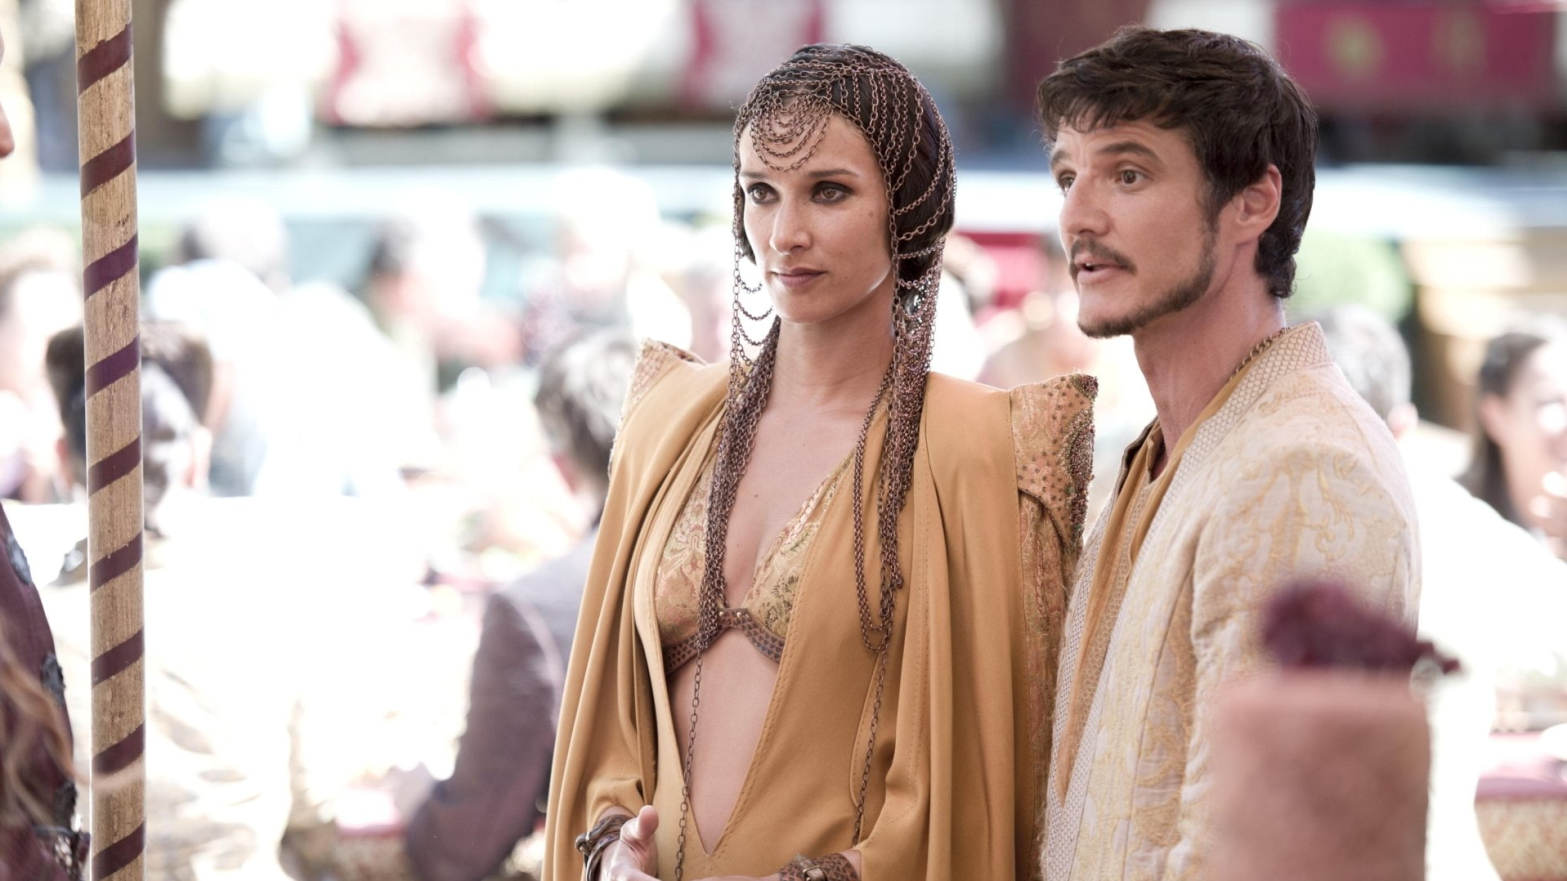 Indira Varma will join former Game of Thrones co-star Pedro Pascal in the Star Wars universe. (Photo: HBO)